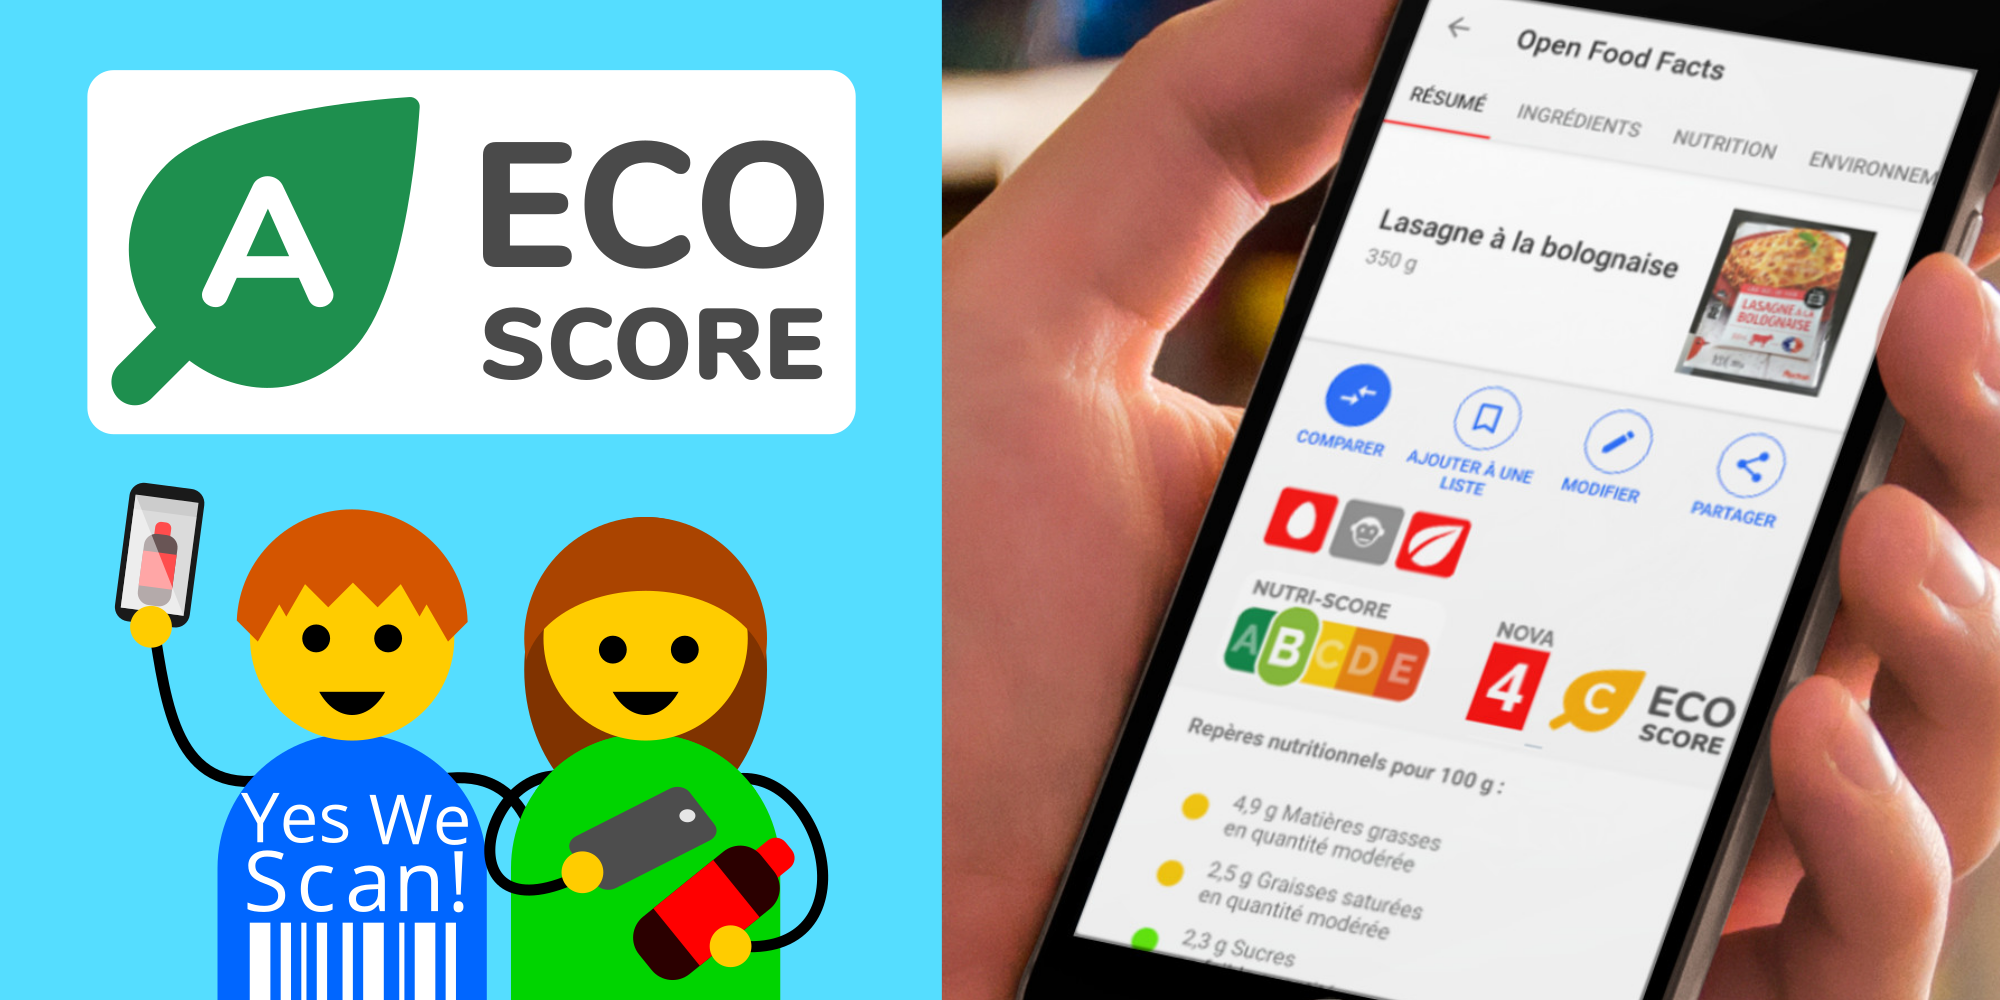 The Eco-Score on Open Food Facts